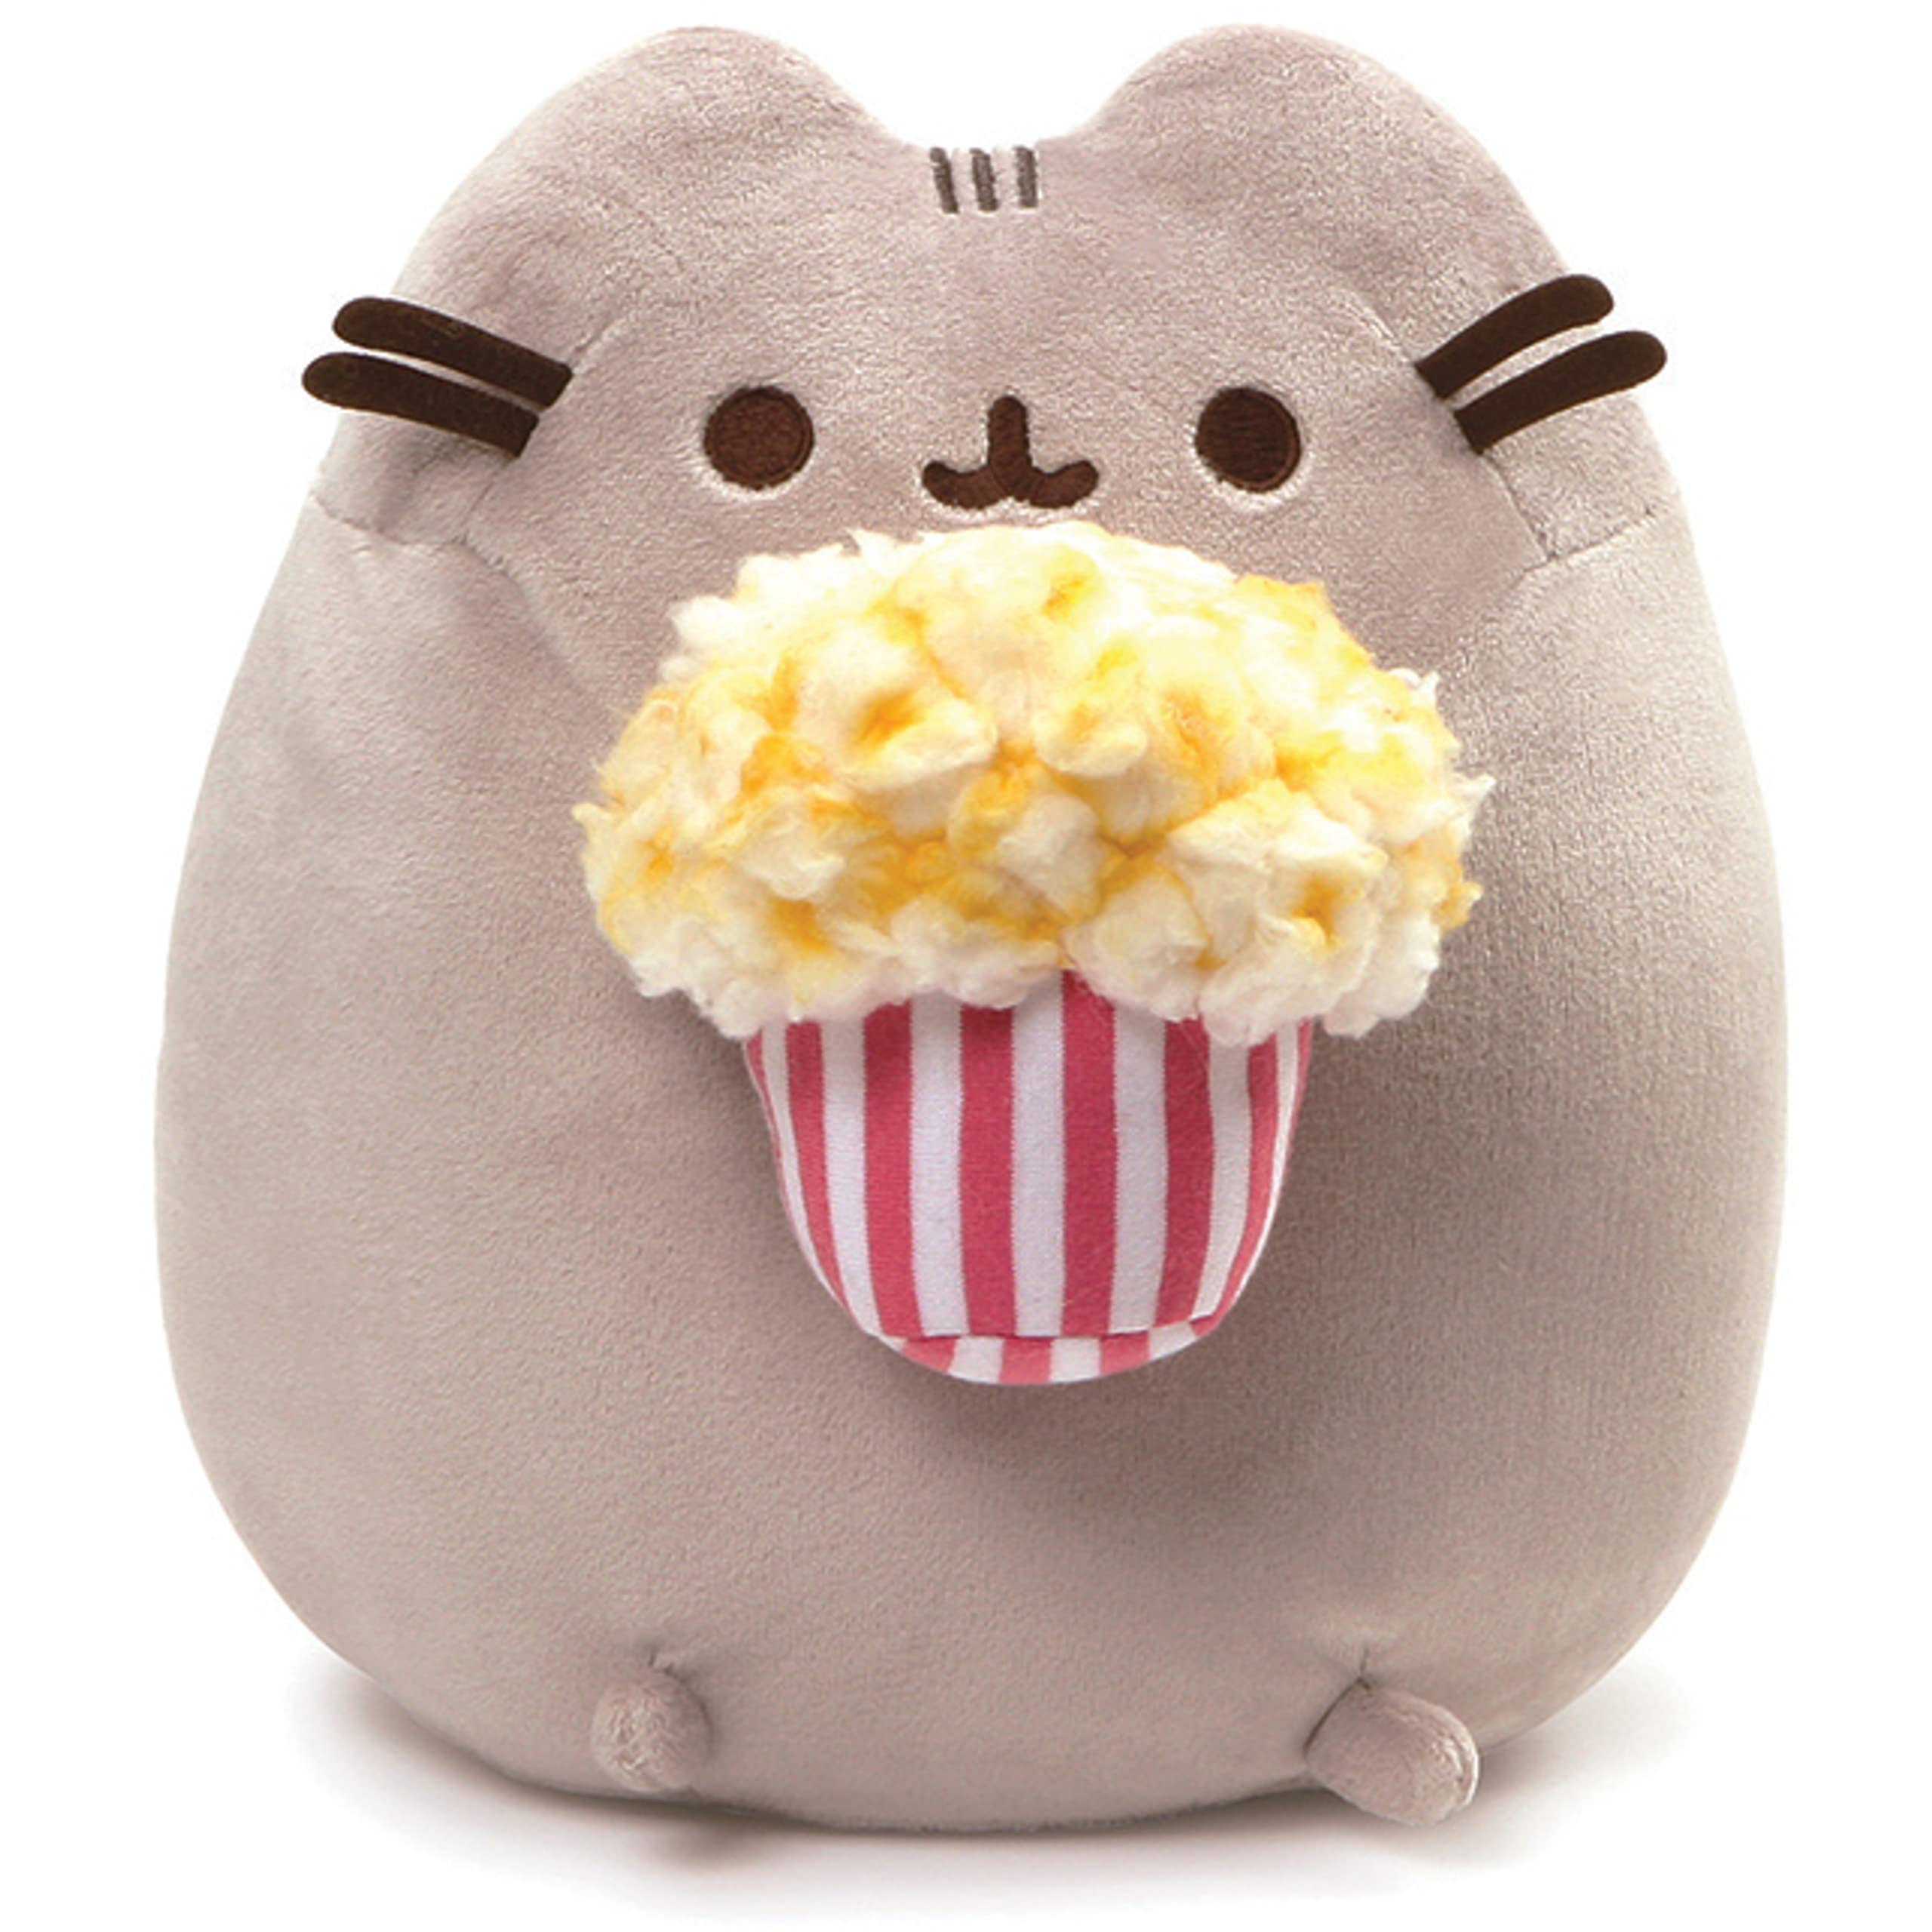 9.5" GUND Pusheen Snackables Popcorn Cat Stuffed Plush $12.19 + Free Shipping w/ Prime or on $35+